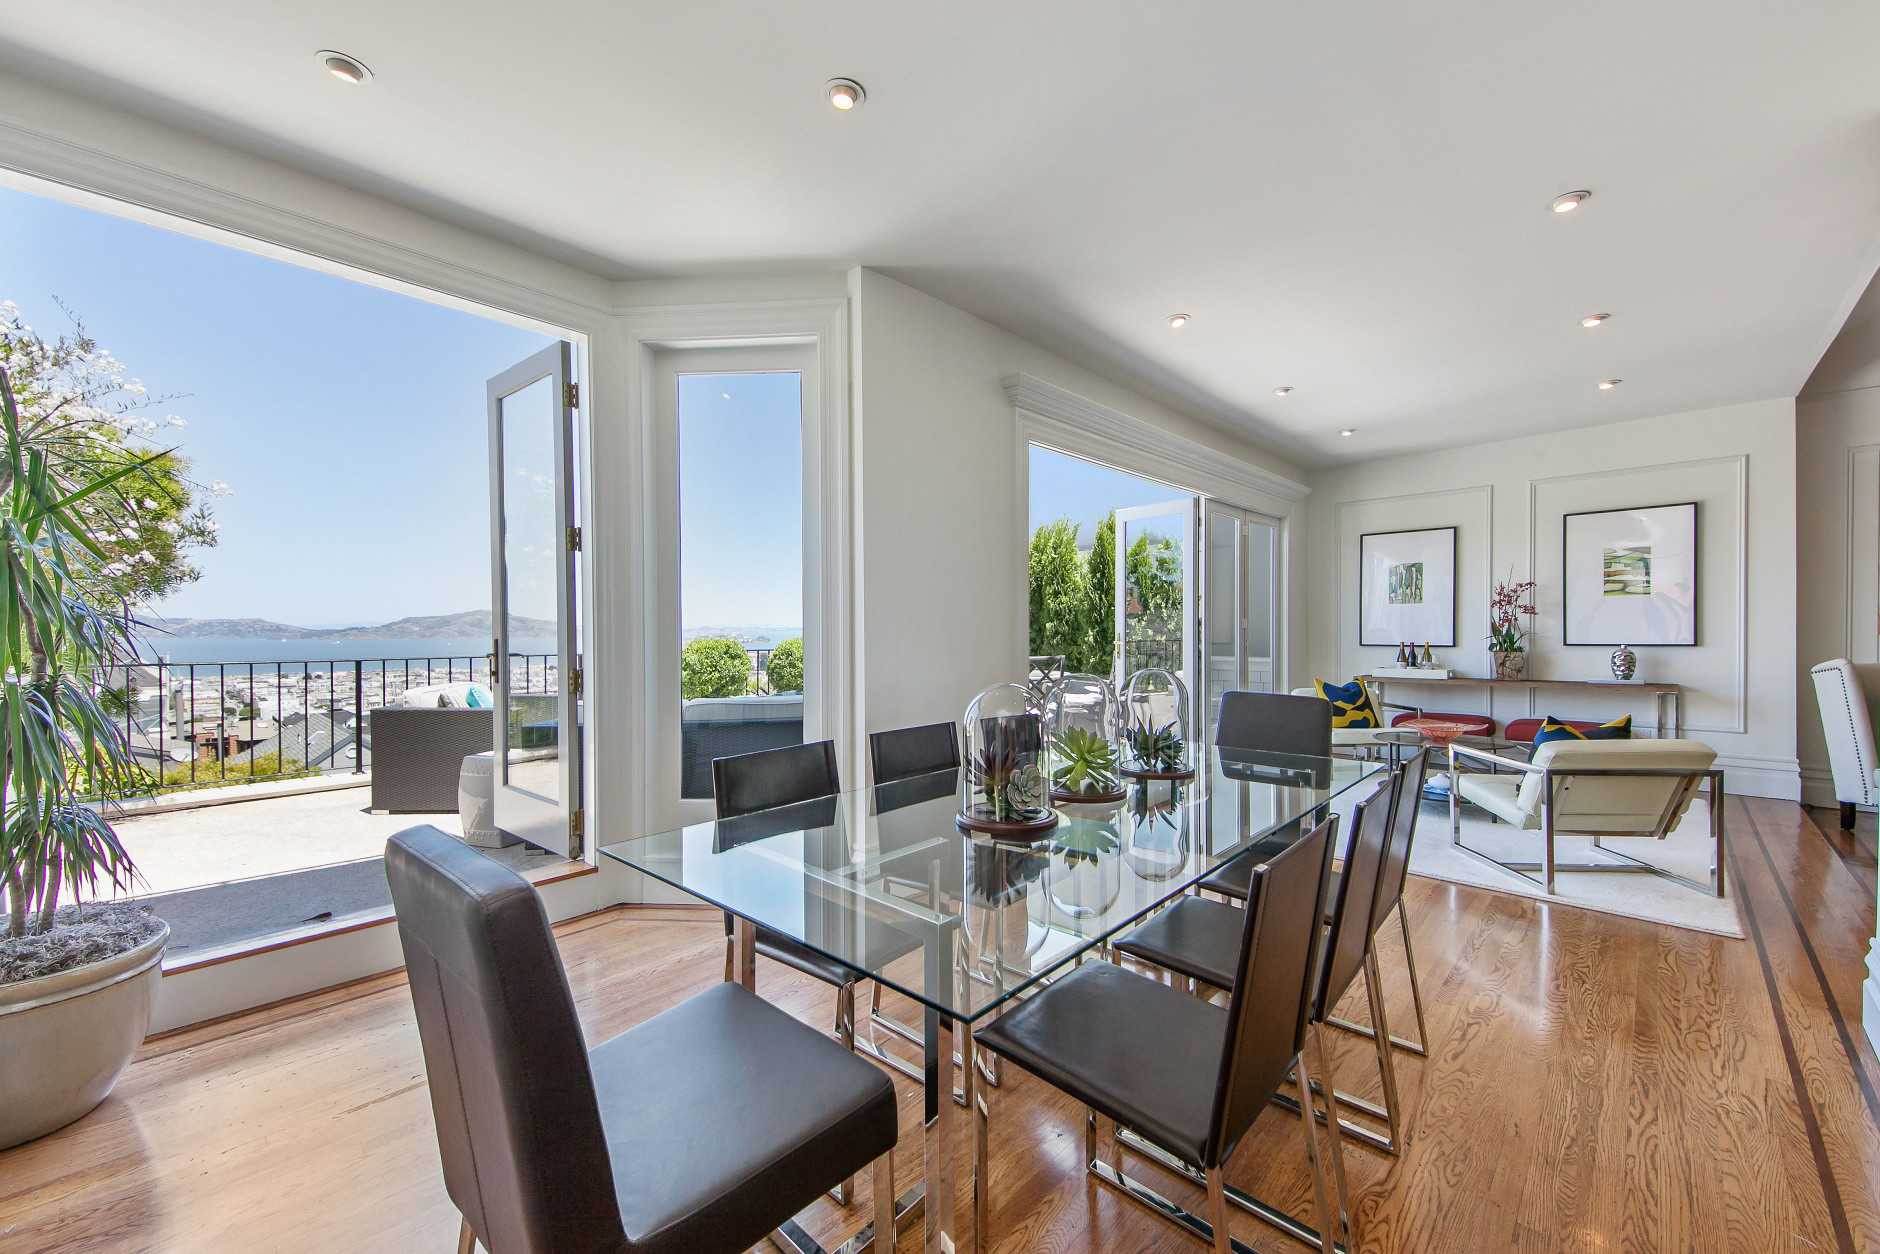 The house has wide views of the bay, curving stairwell and light hardwood floors. (Jason Wakefield/TopTenRealEstate)